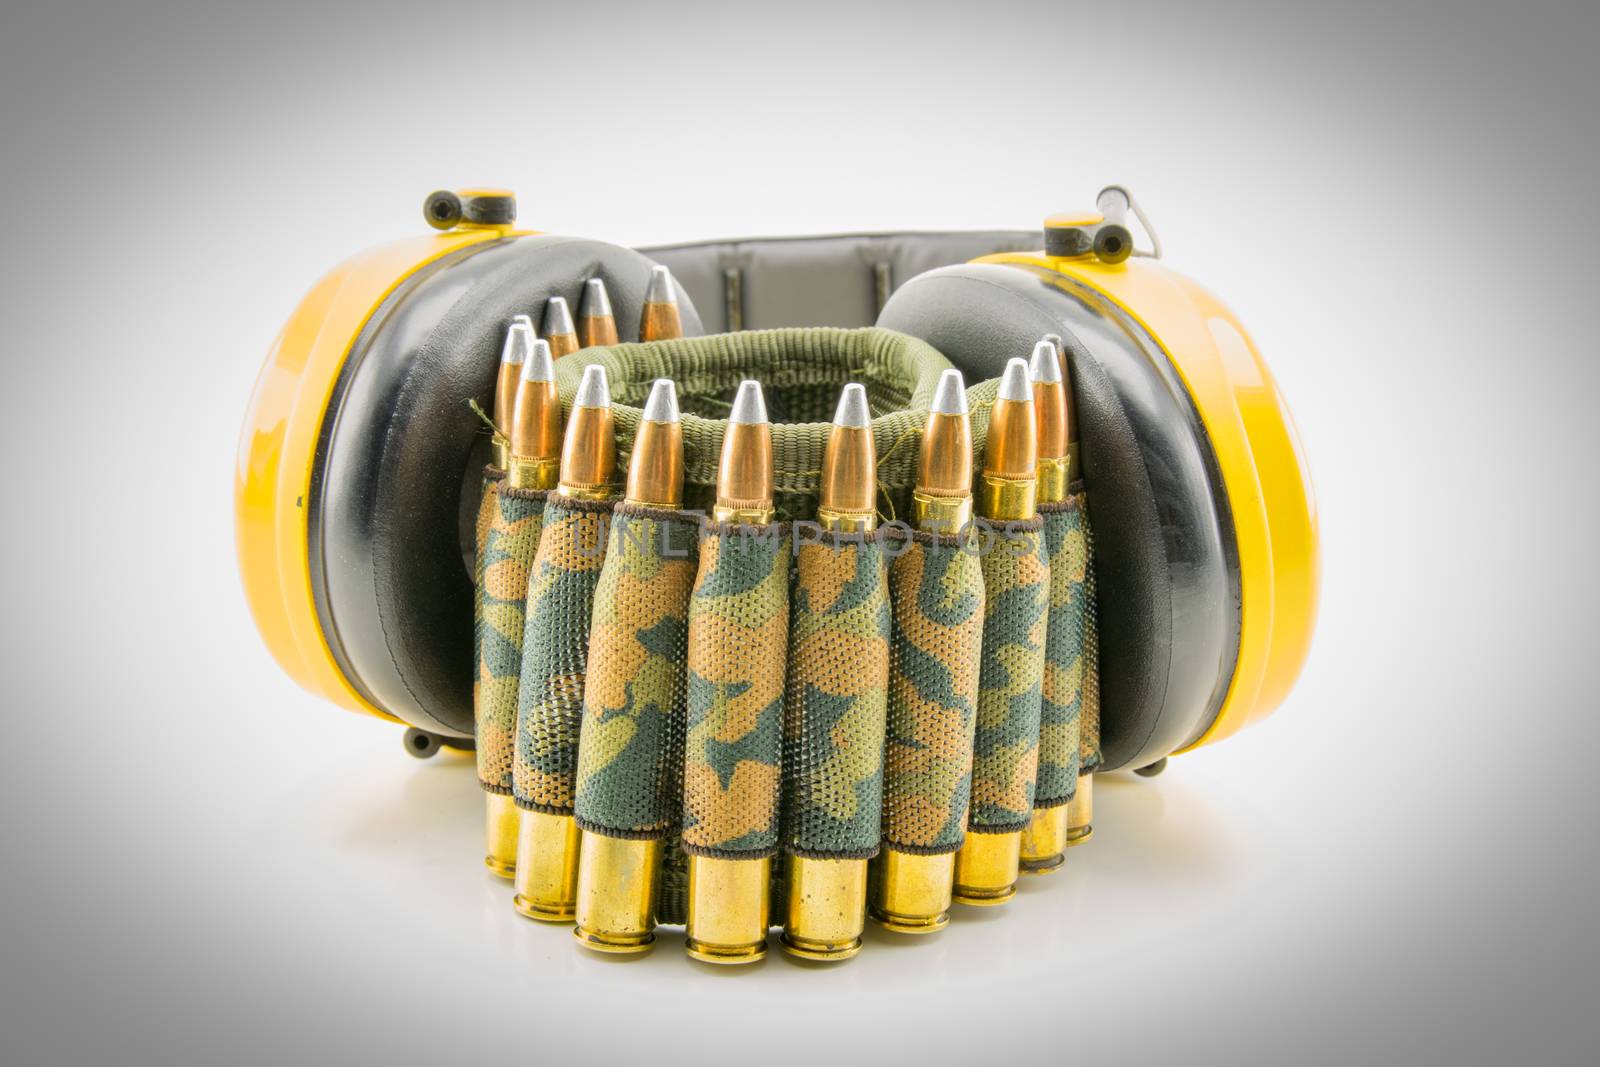 yellow ear protection and camouflage ammunition belt by Isaac74